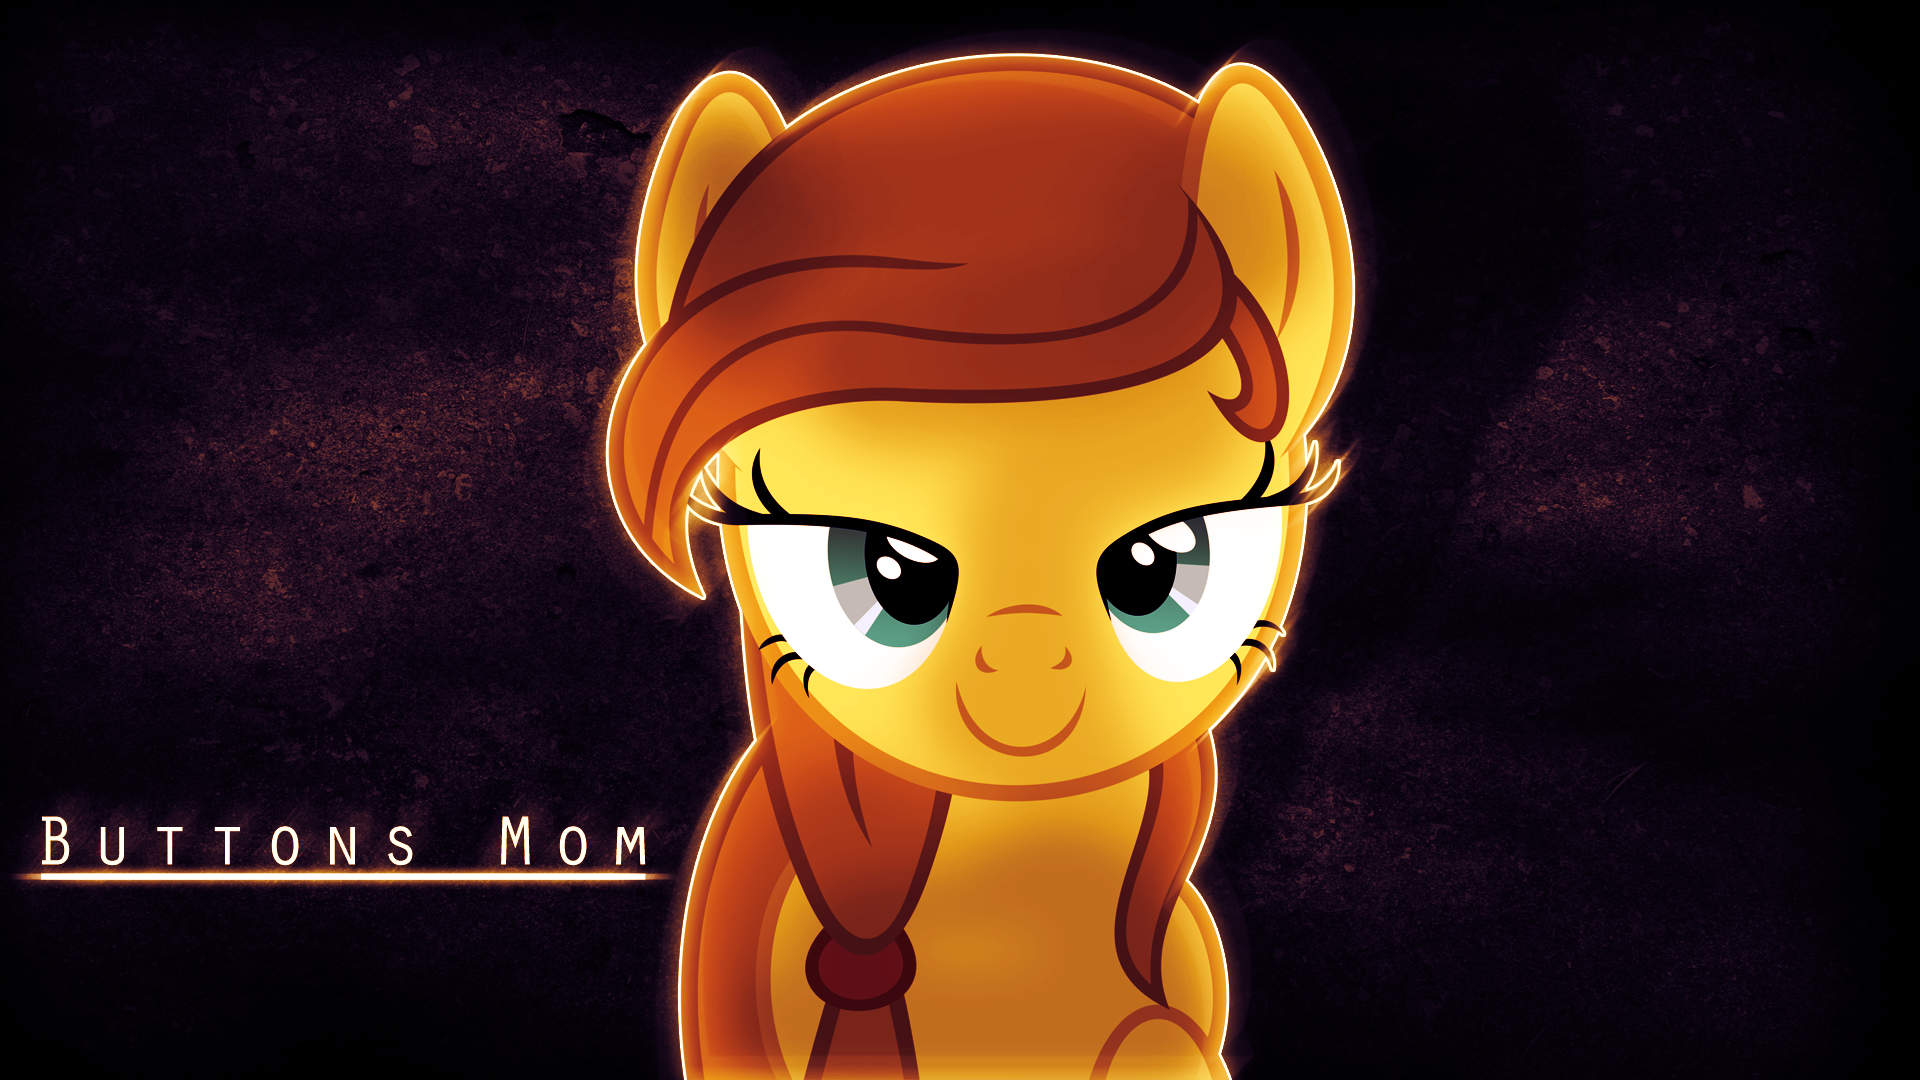 Buttons Mom by TheMusicBrony